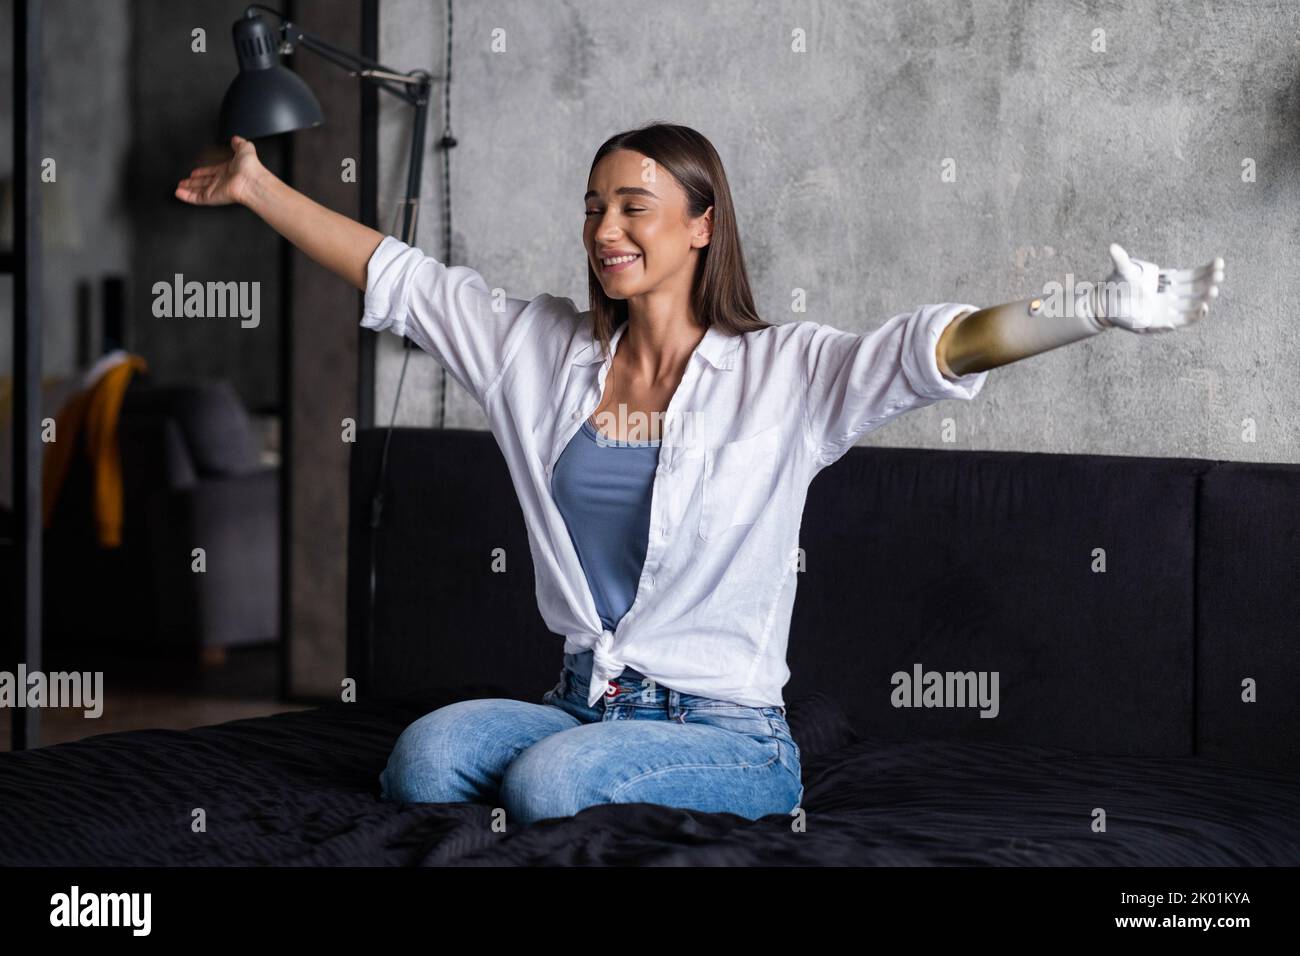 Portrait happy woman with prosthetic arm, girl with disability relaxing raising arms artificial prosthetic limb. Stock Photo